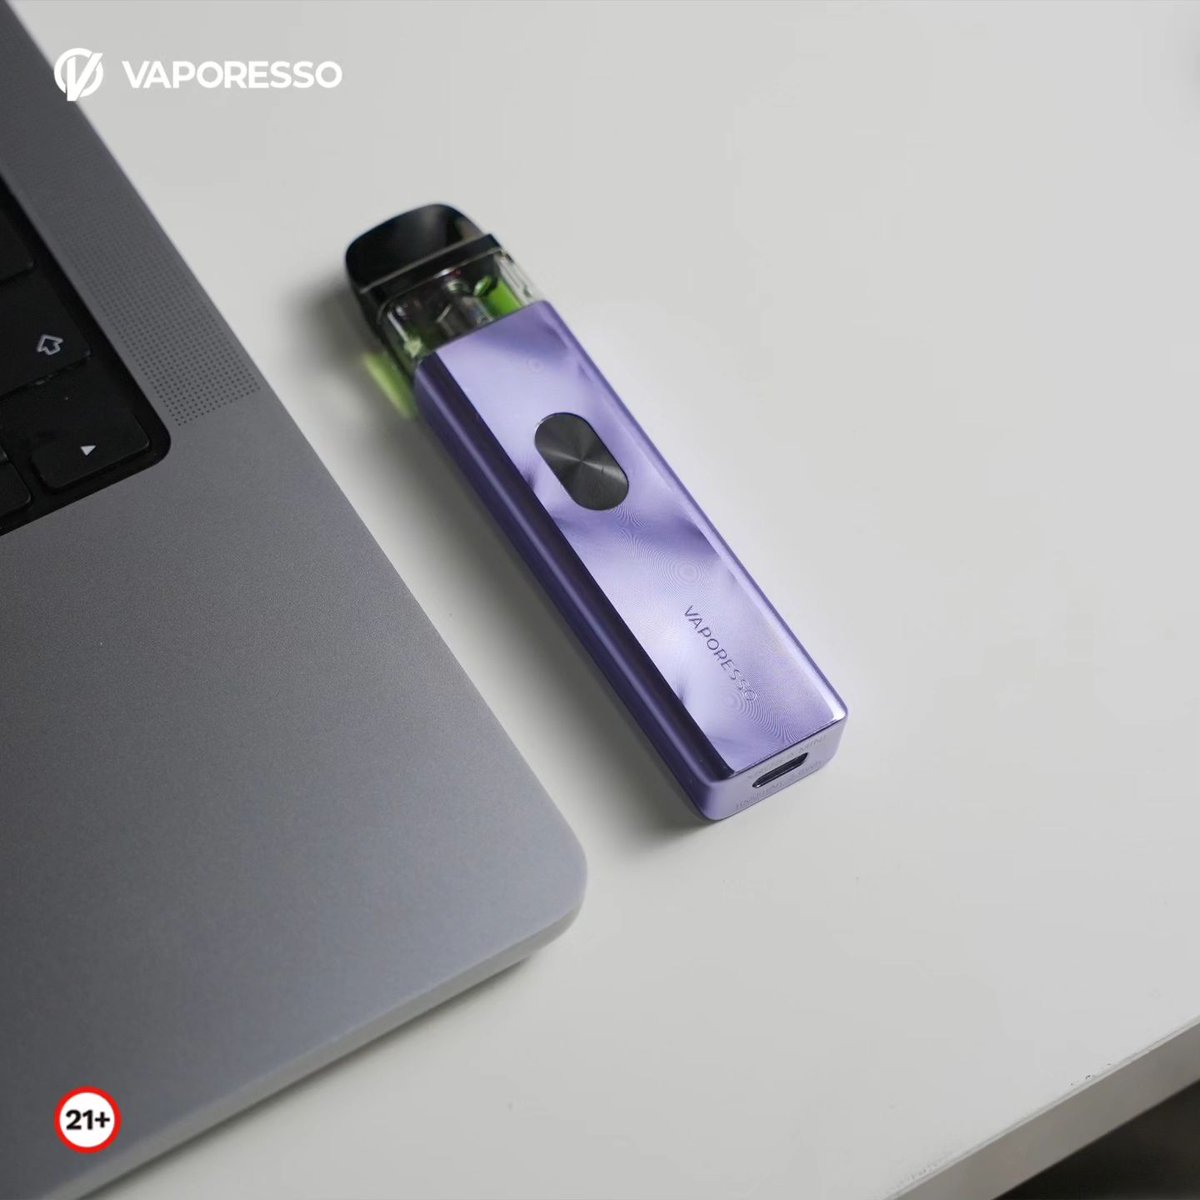 Vaporesso XROS 4 Mini Kit 

Designed for ultimate convenience and performance, the XROS 4 Mini packs power into a sleek, pocket-friendly design.✨✨

⚠ Warning: The device is used with e-liquid which contains addictive chemical nicotine. For Adult use only.